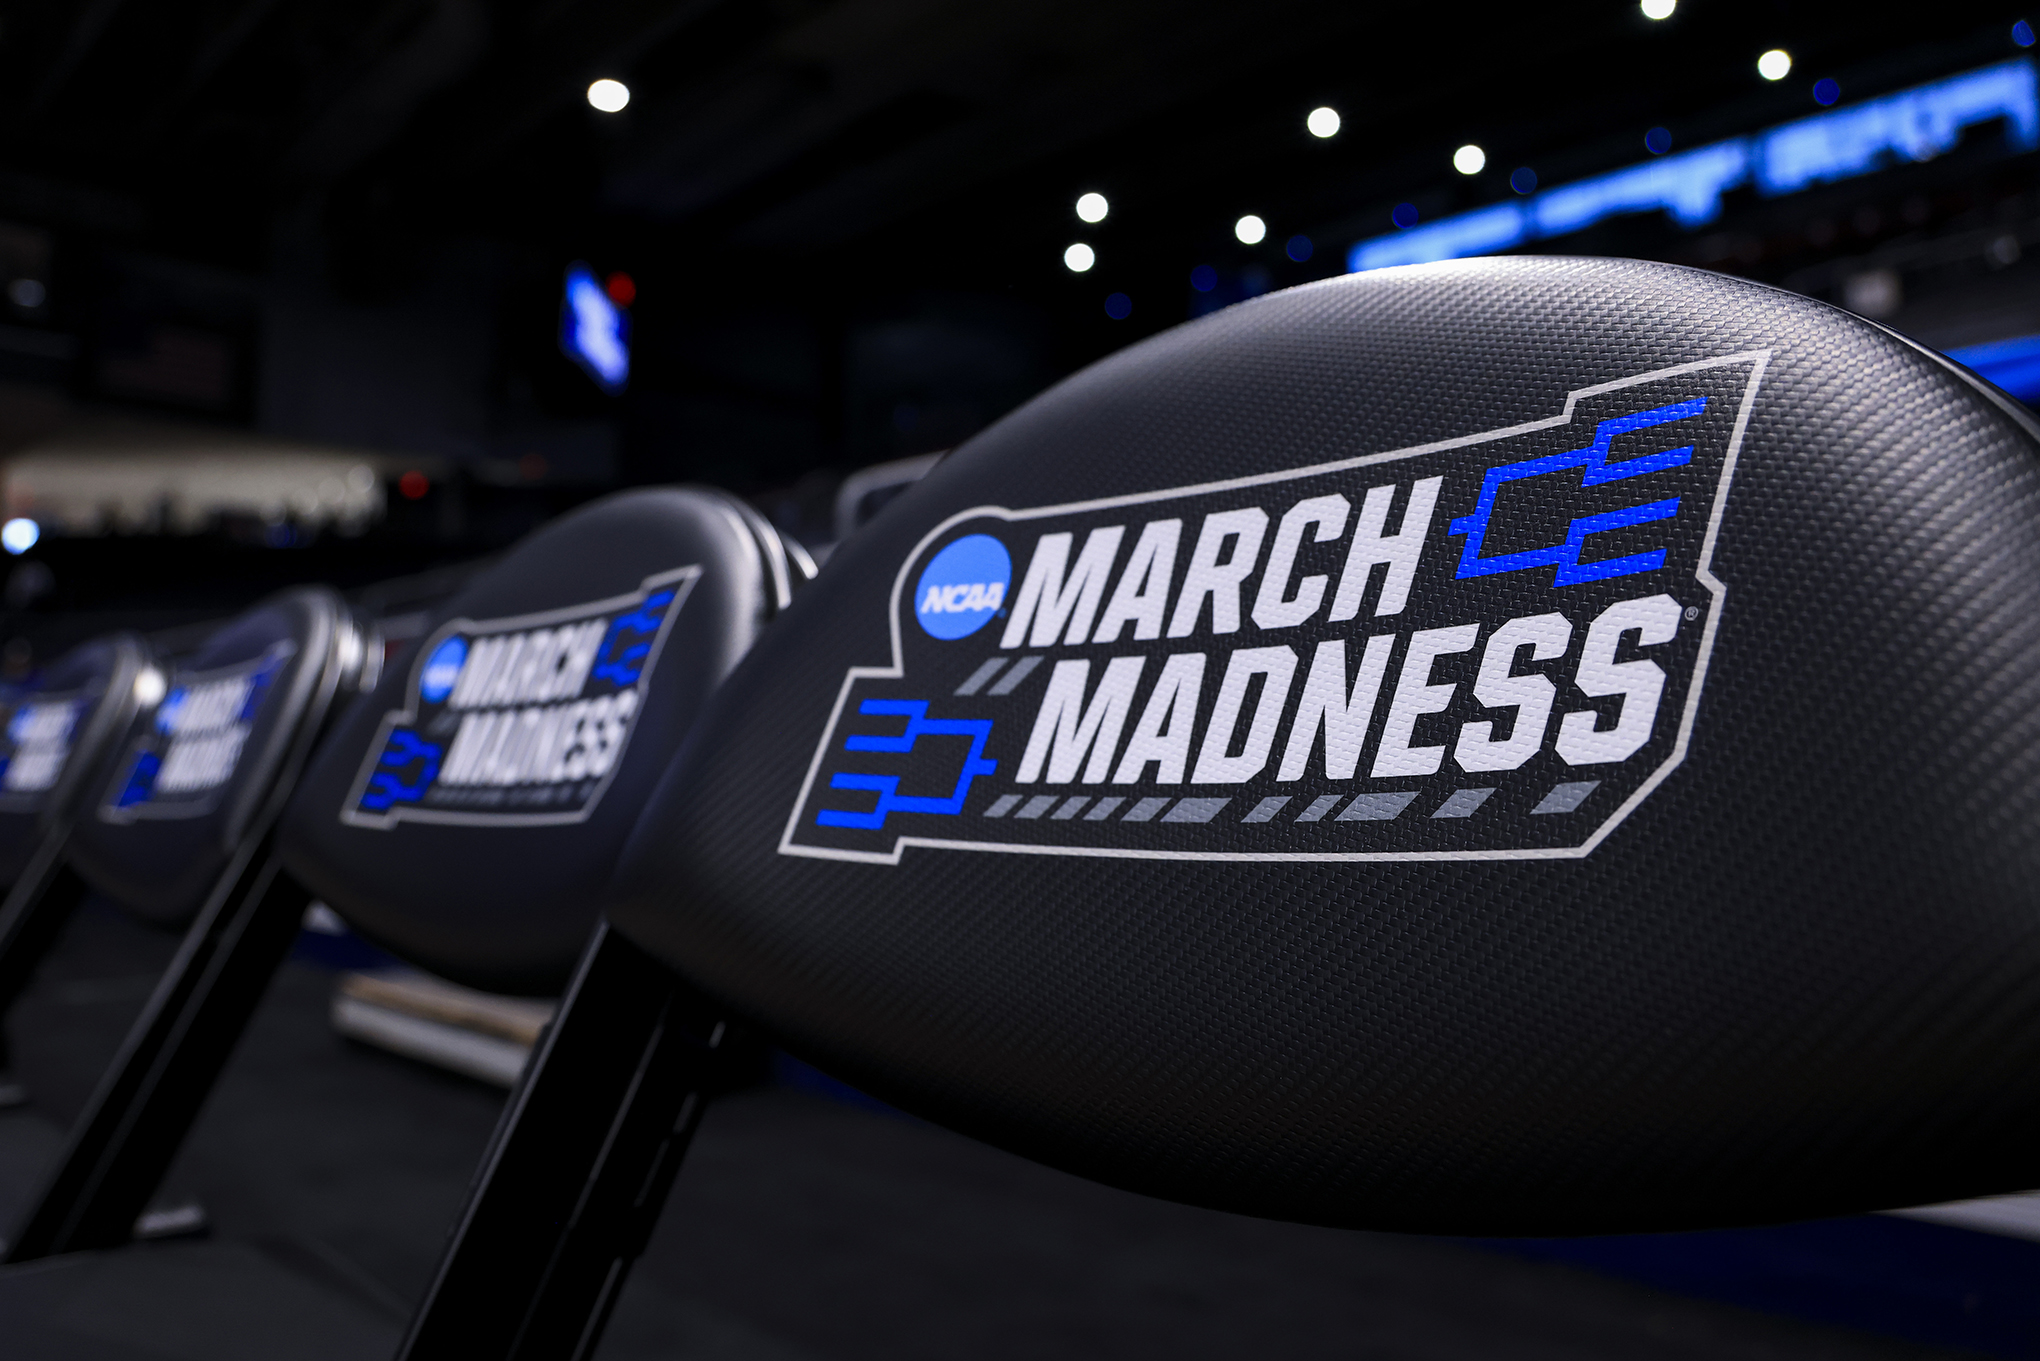 4 Wisconsin teams are on their way to March Madness